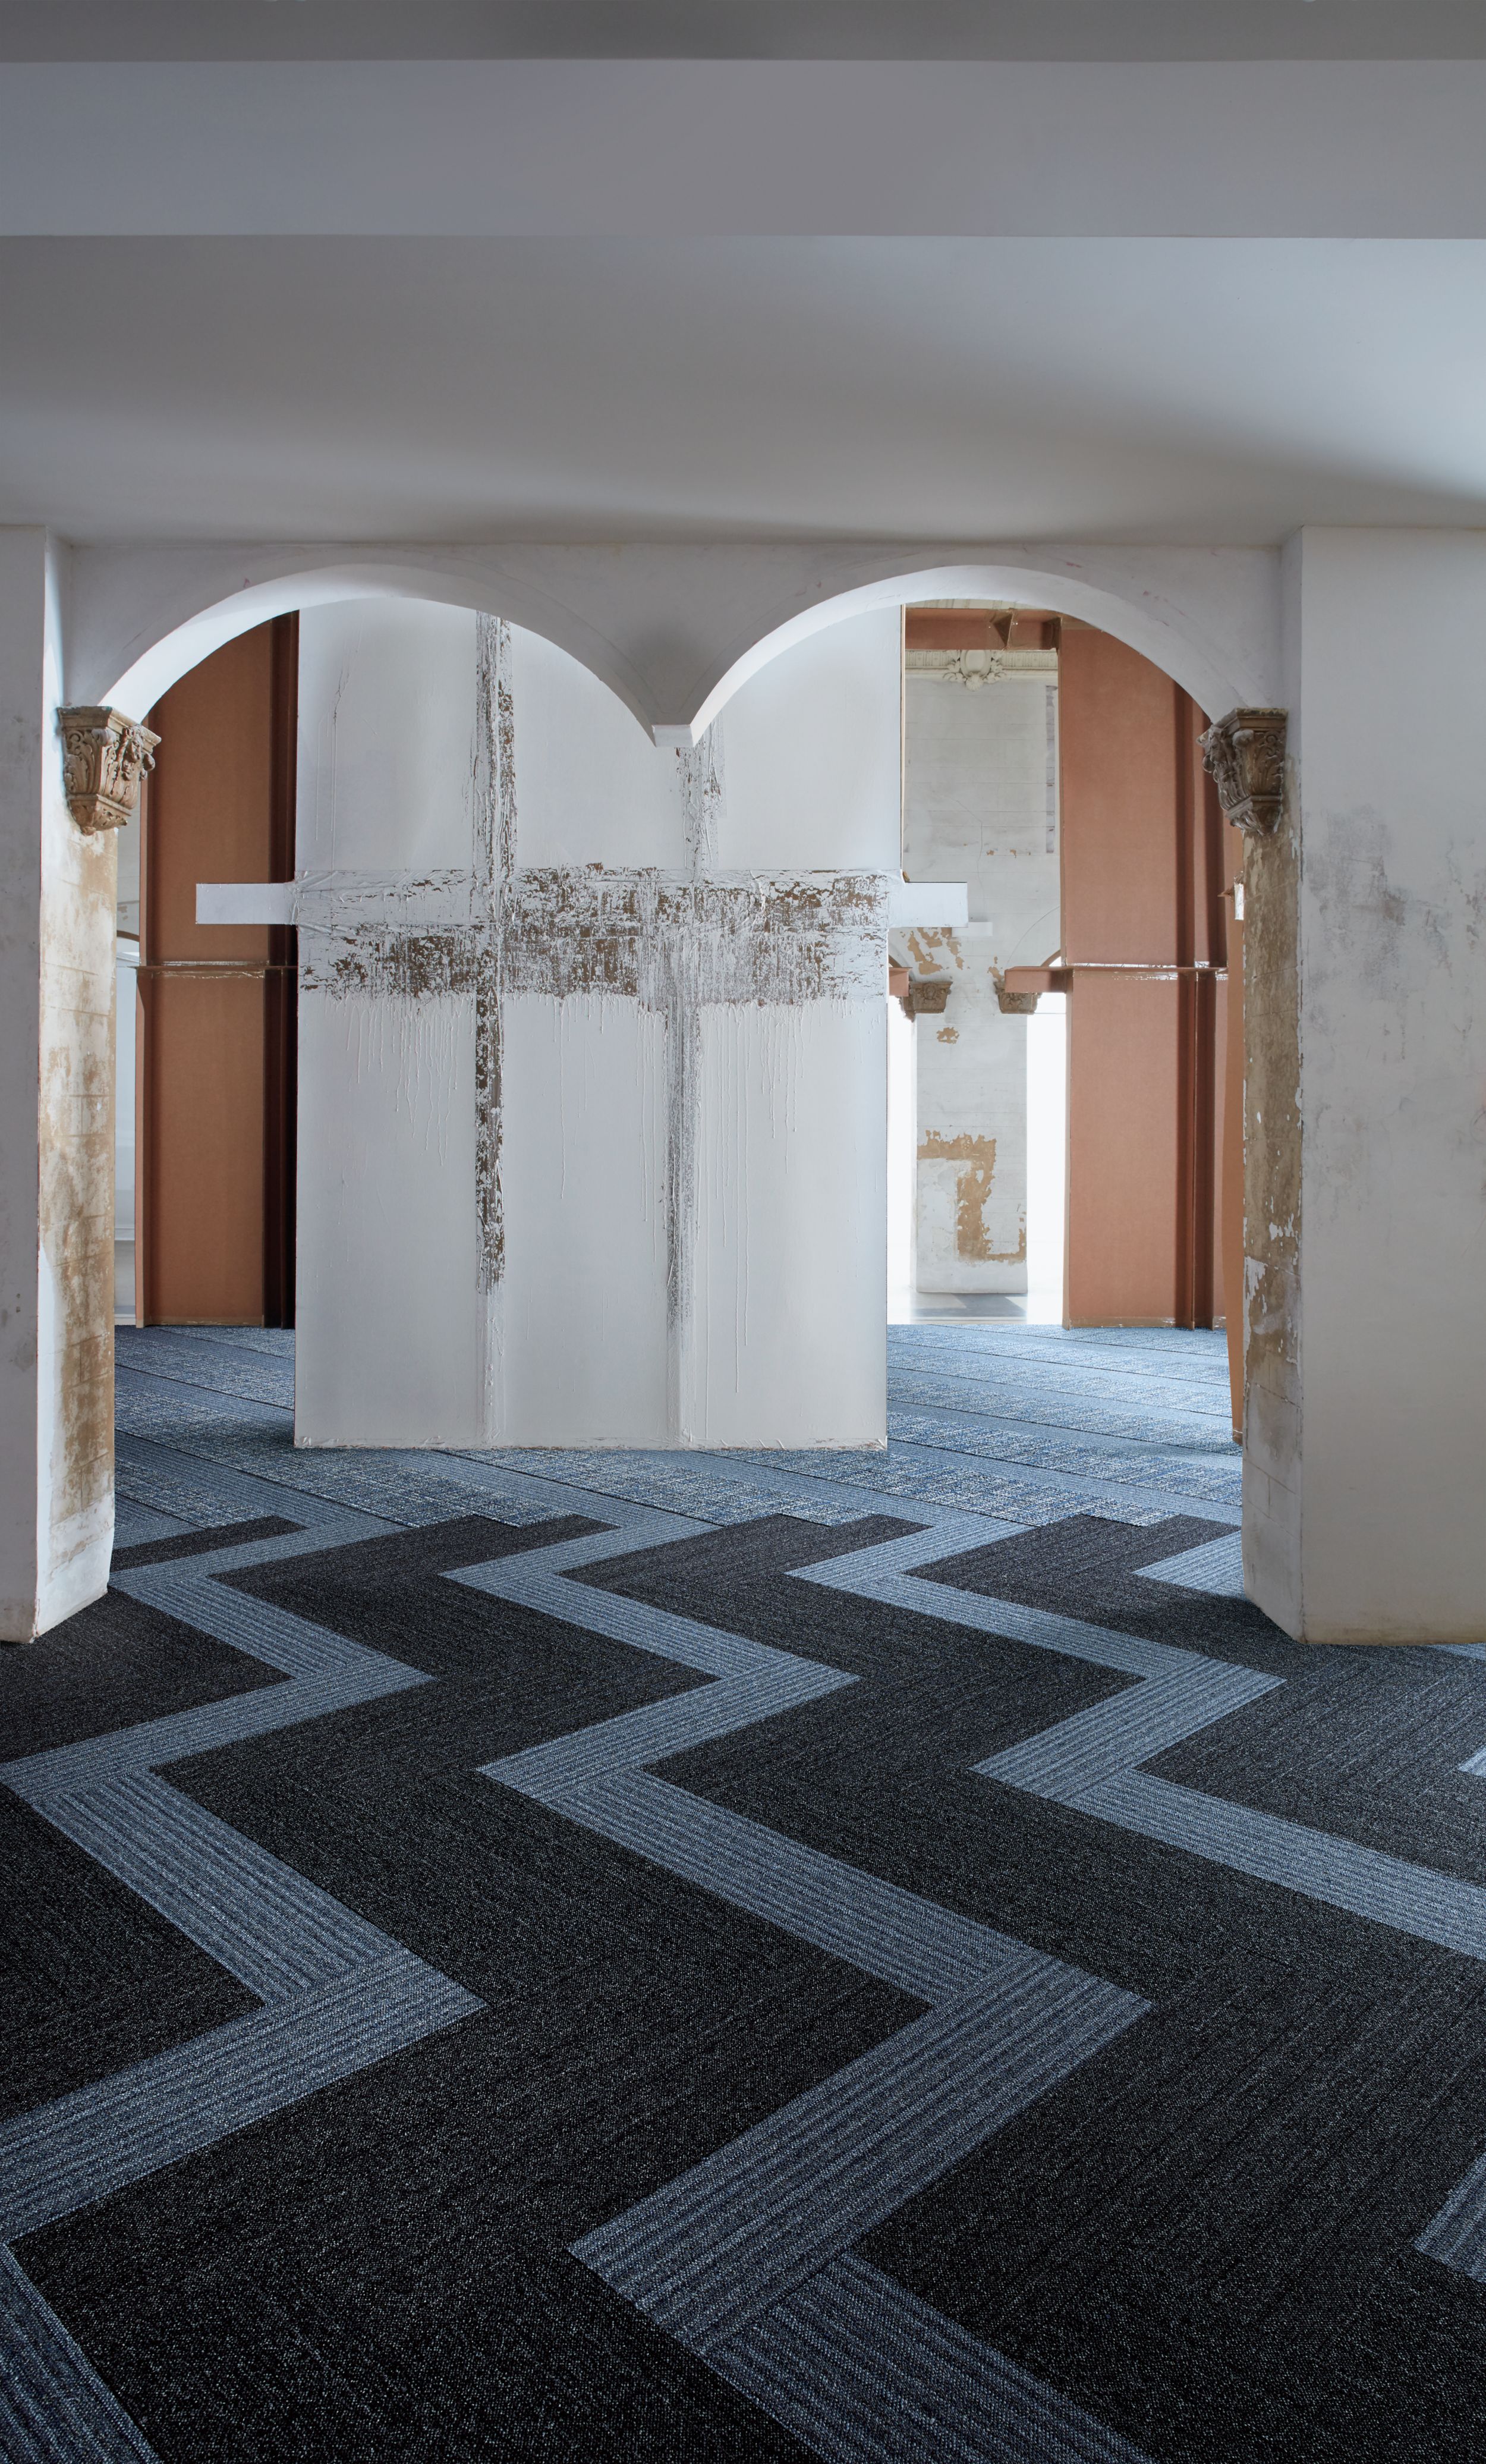 Interface WW865 and WW895 plank carpet tile in lobby setting with archway imagen número 6